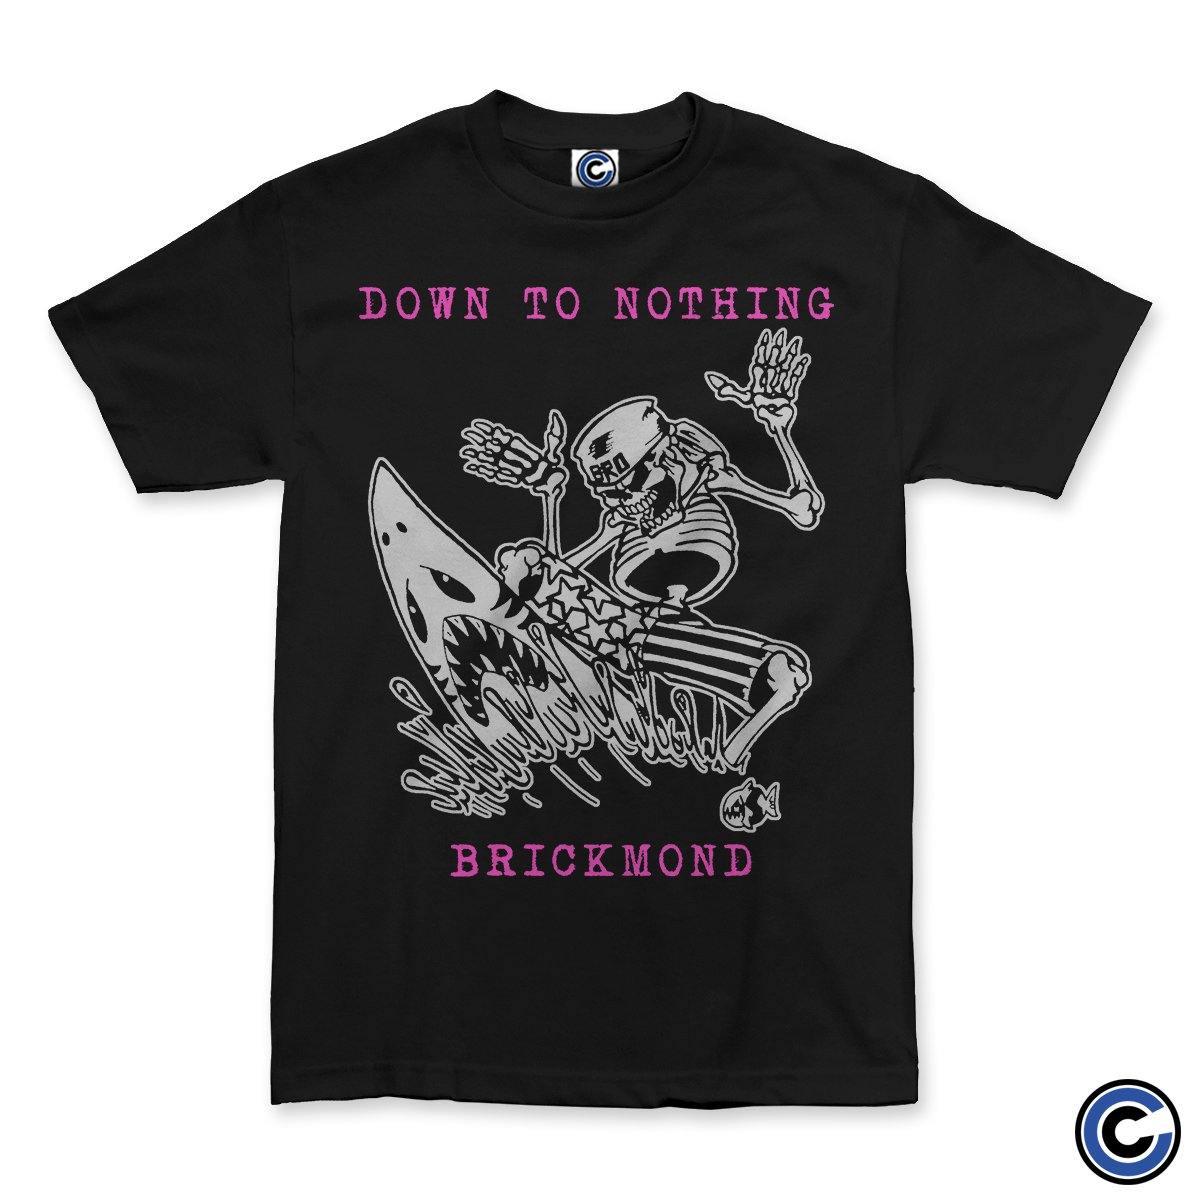 Buy – Down To Nothing "Skeleton Surfer" Shirt – Band & Music Merch – Cold Cuts Merch